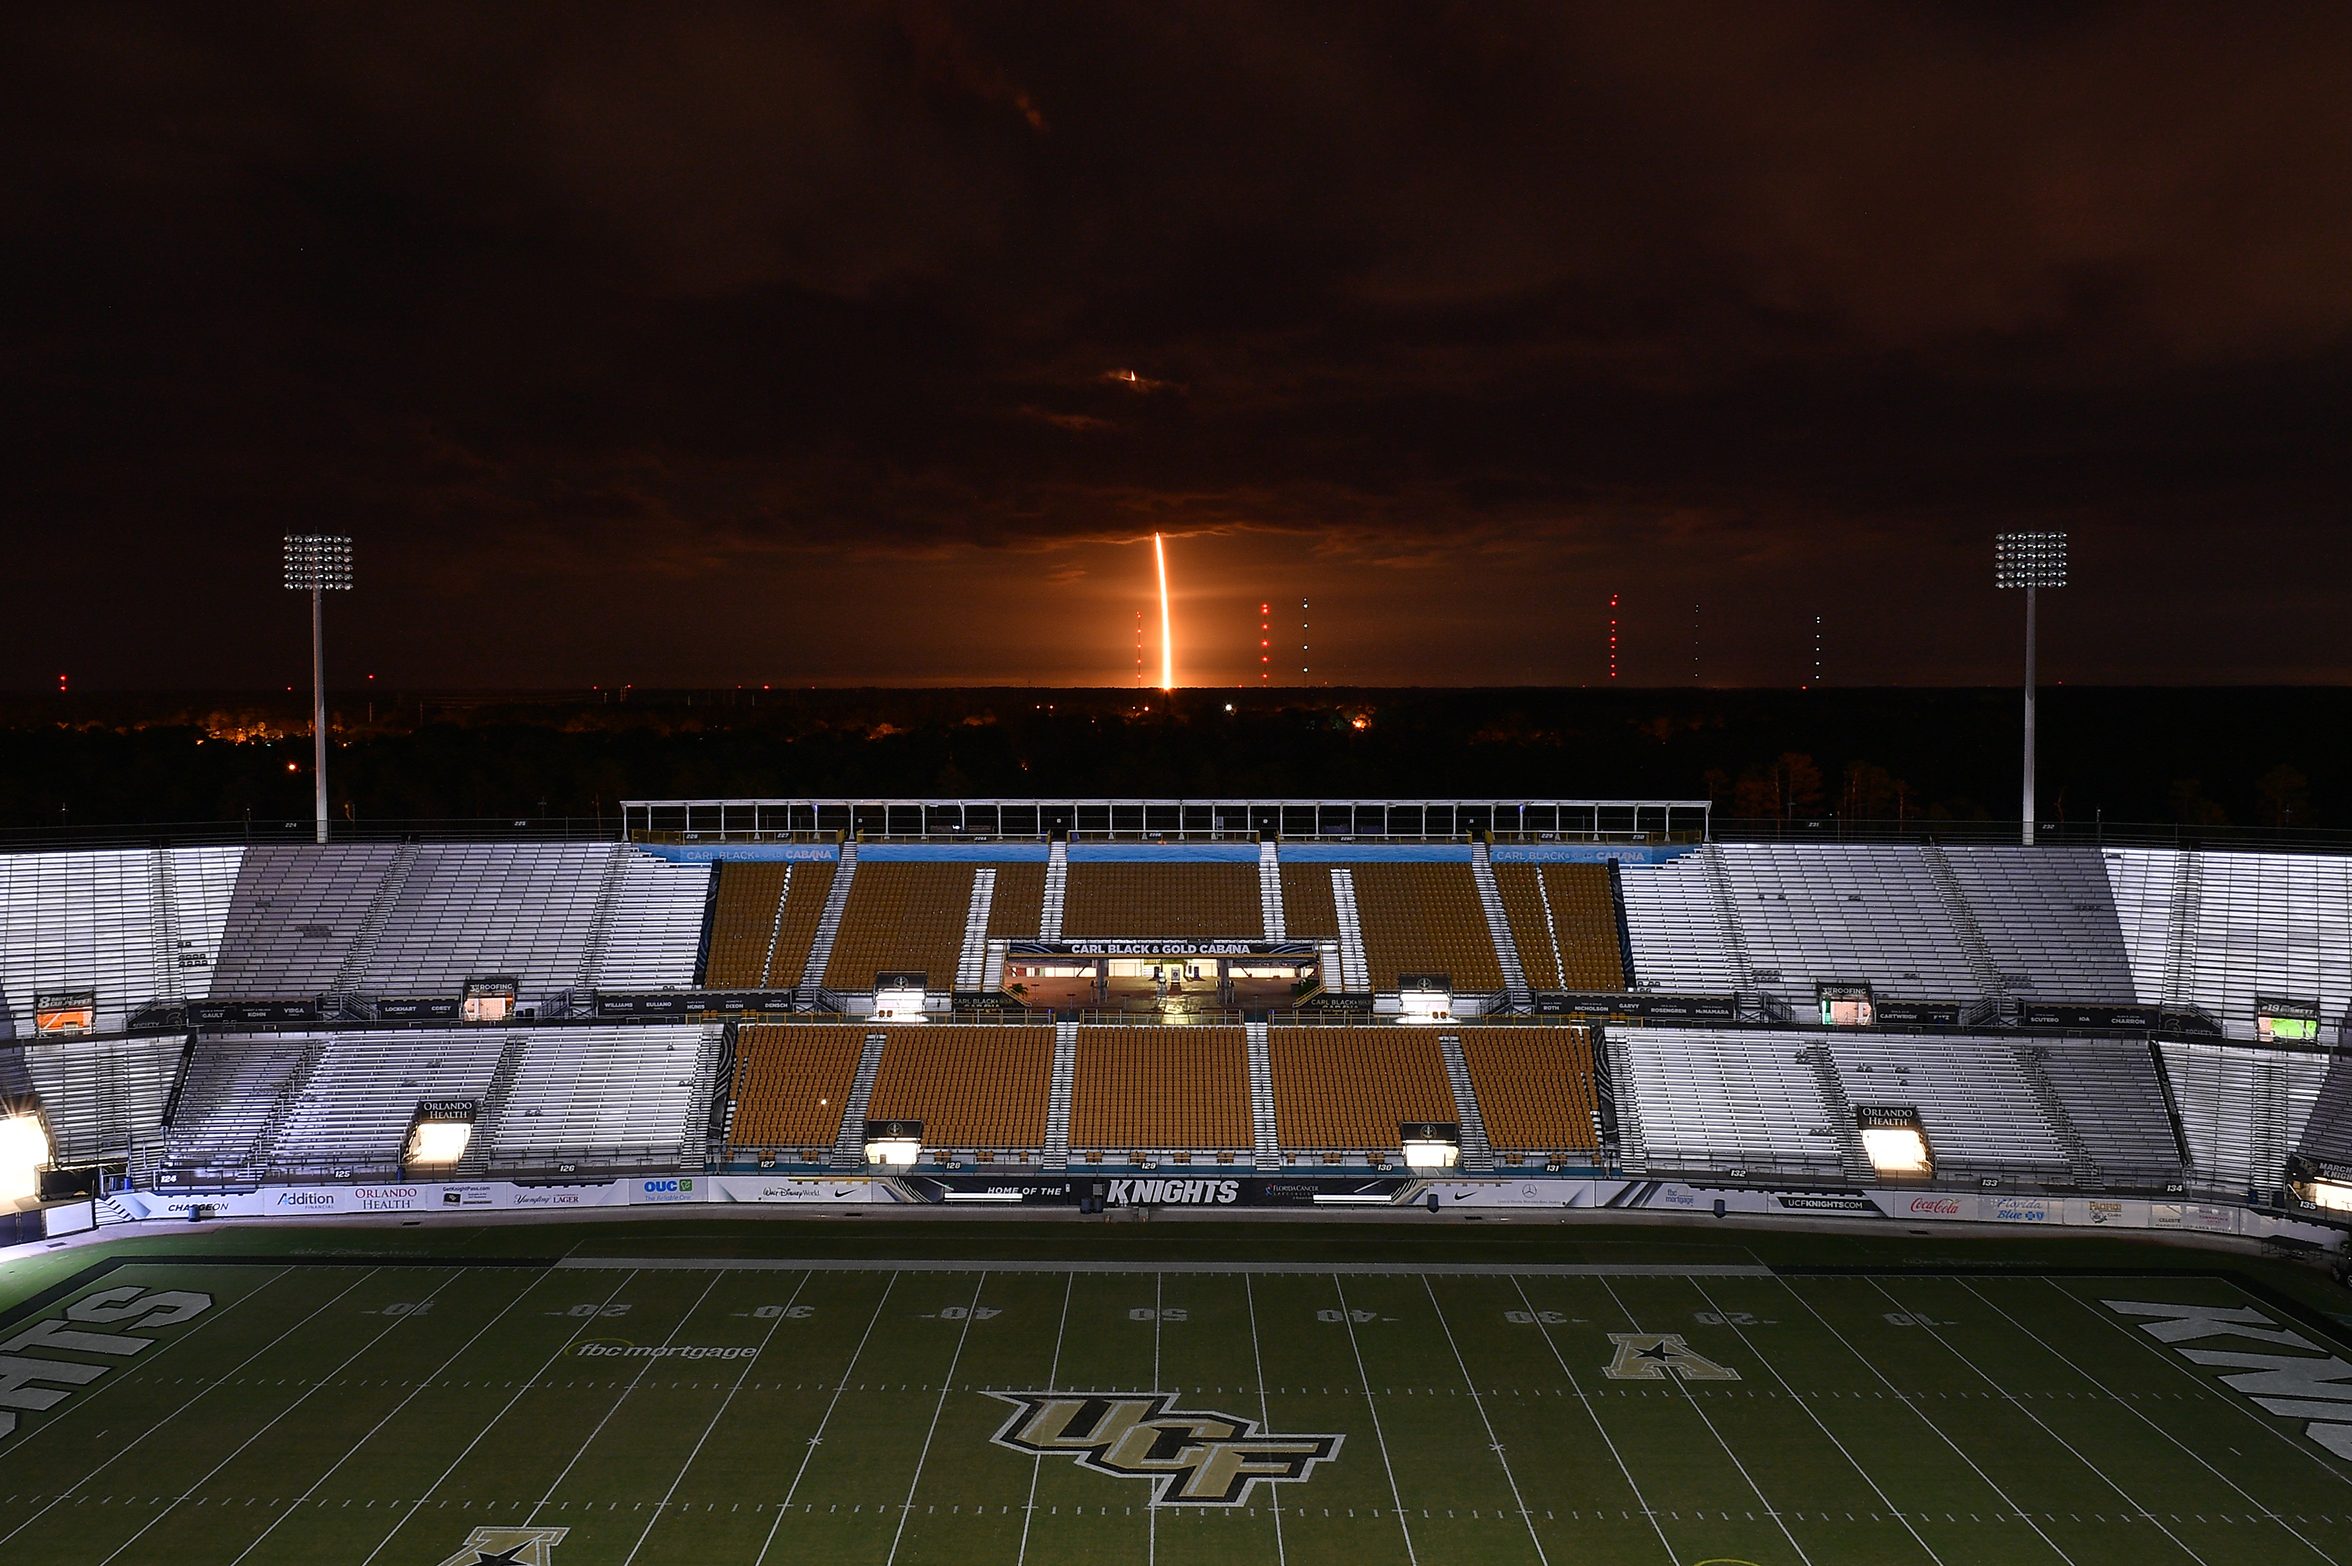 A view of the SpaceX Falcon 9 rocket launch from UCF Knight's Spectrum Stadium on Nov. 15 in Orlando, Florida